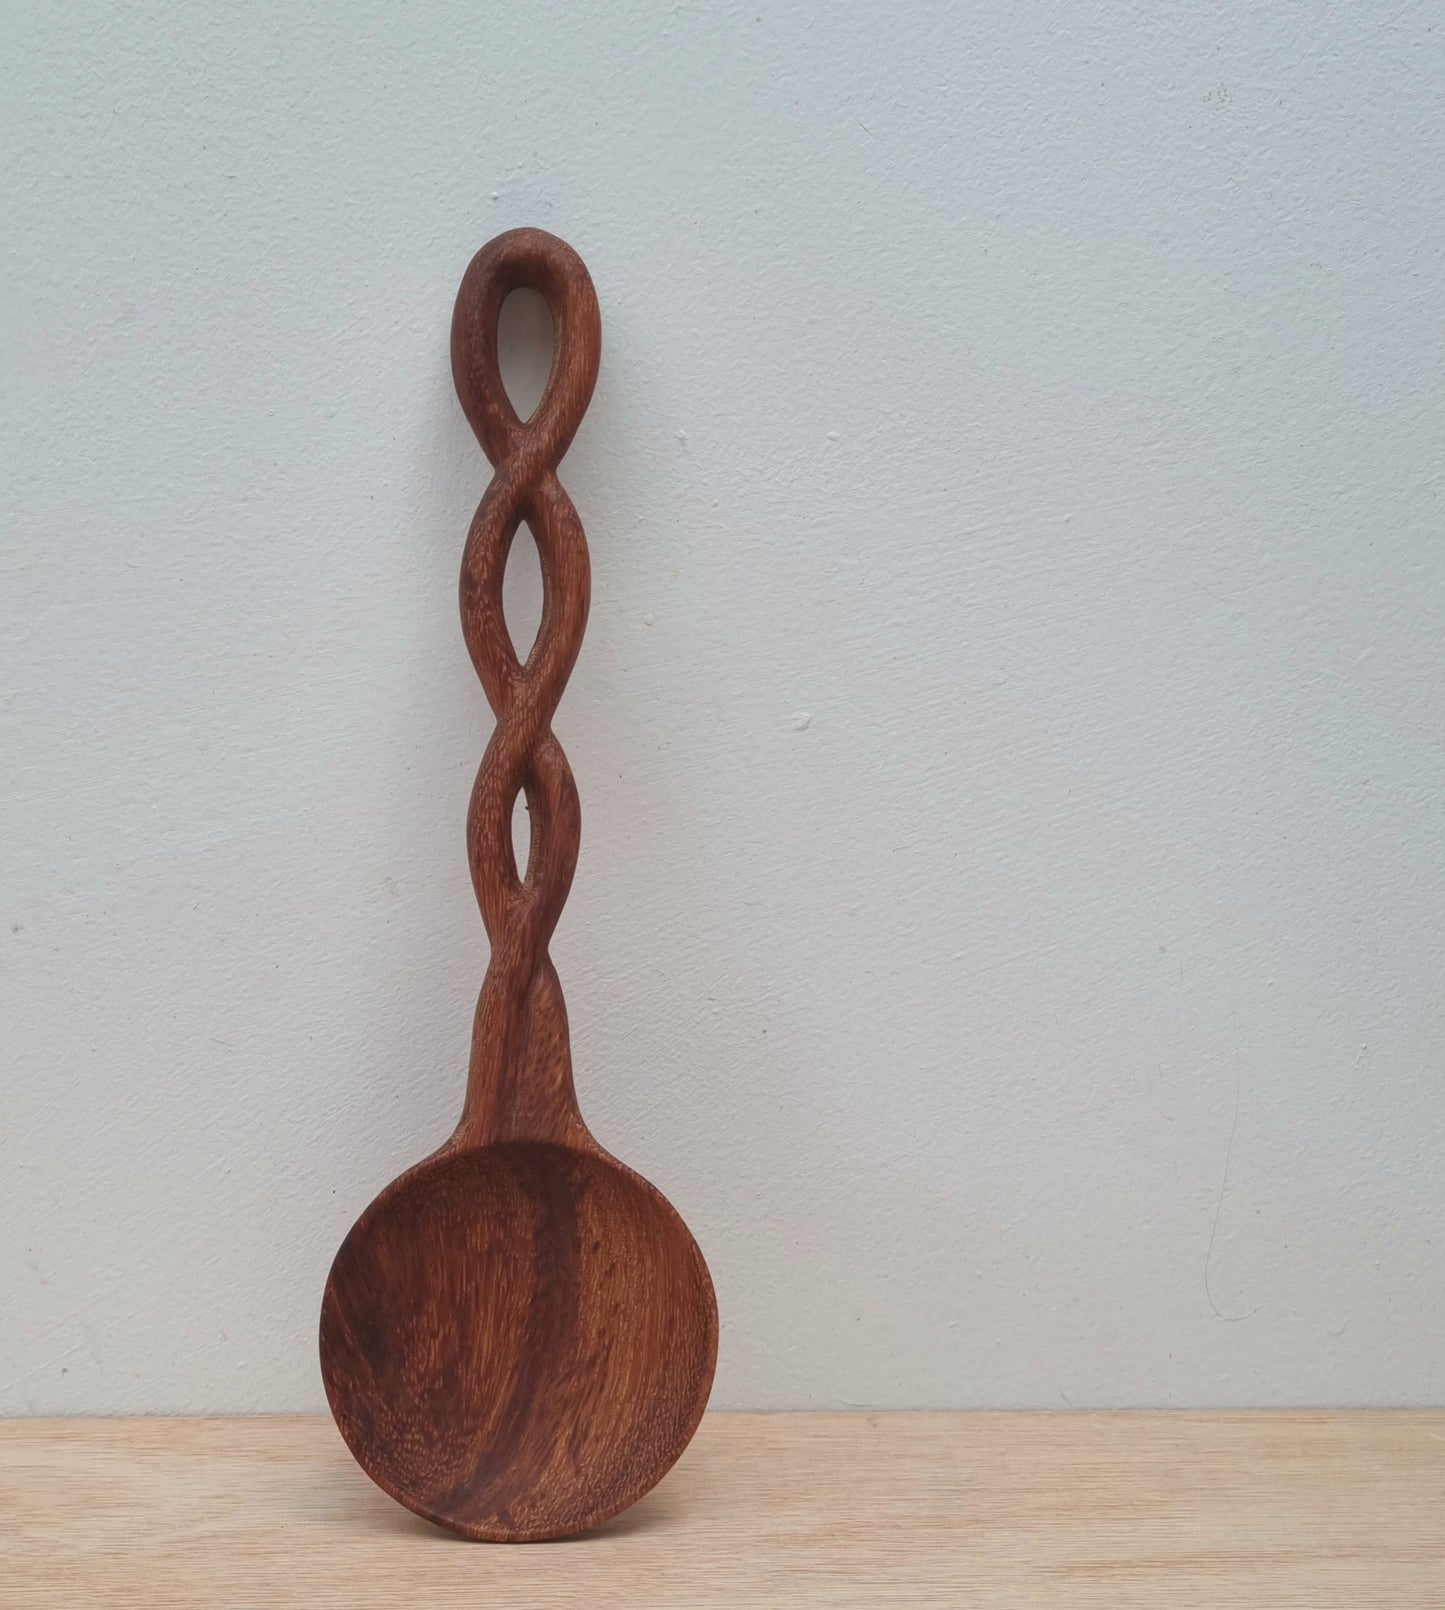 Hand carved wooden spoons